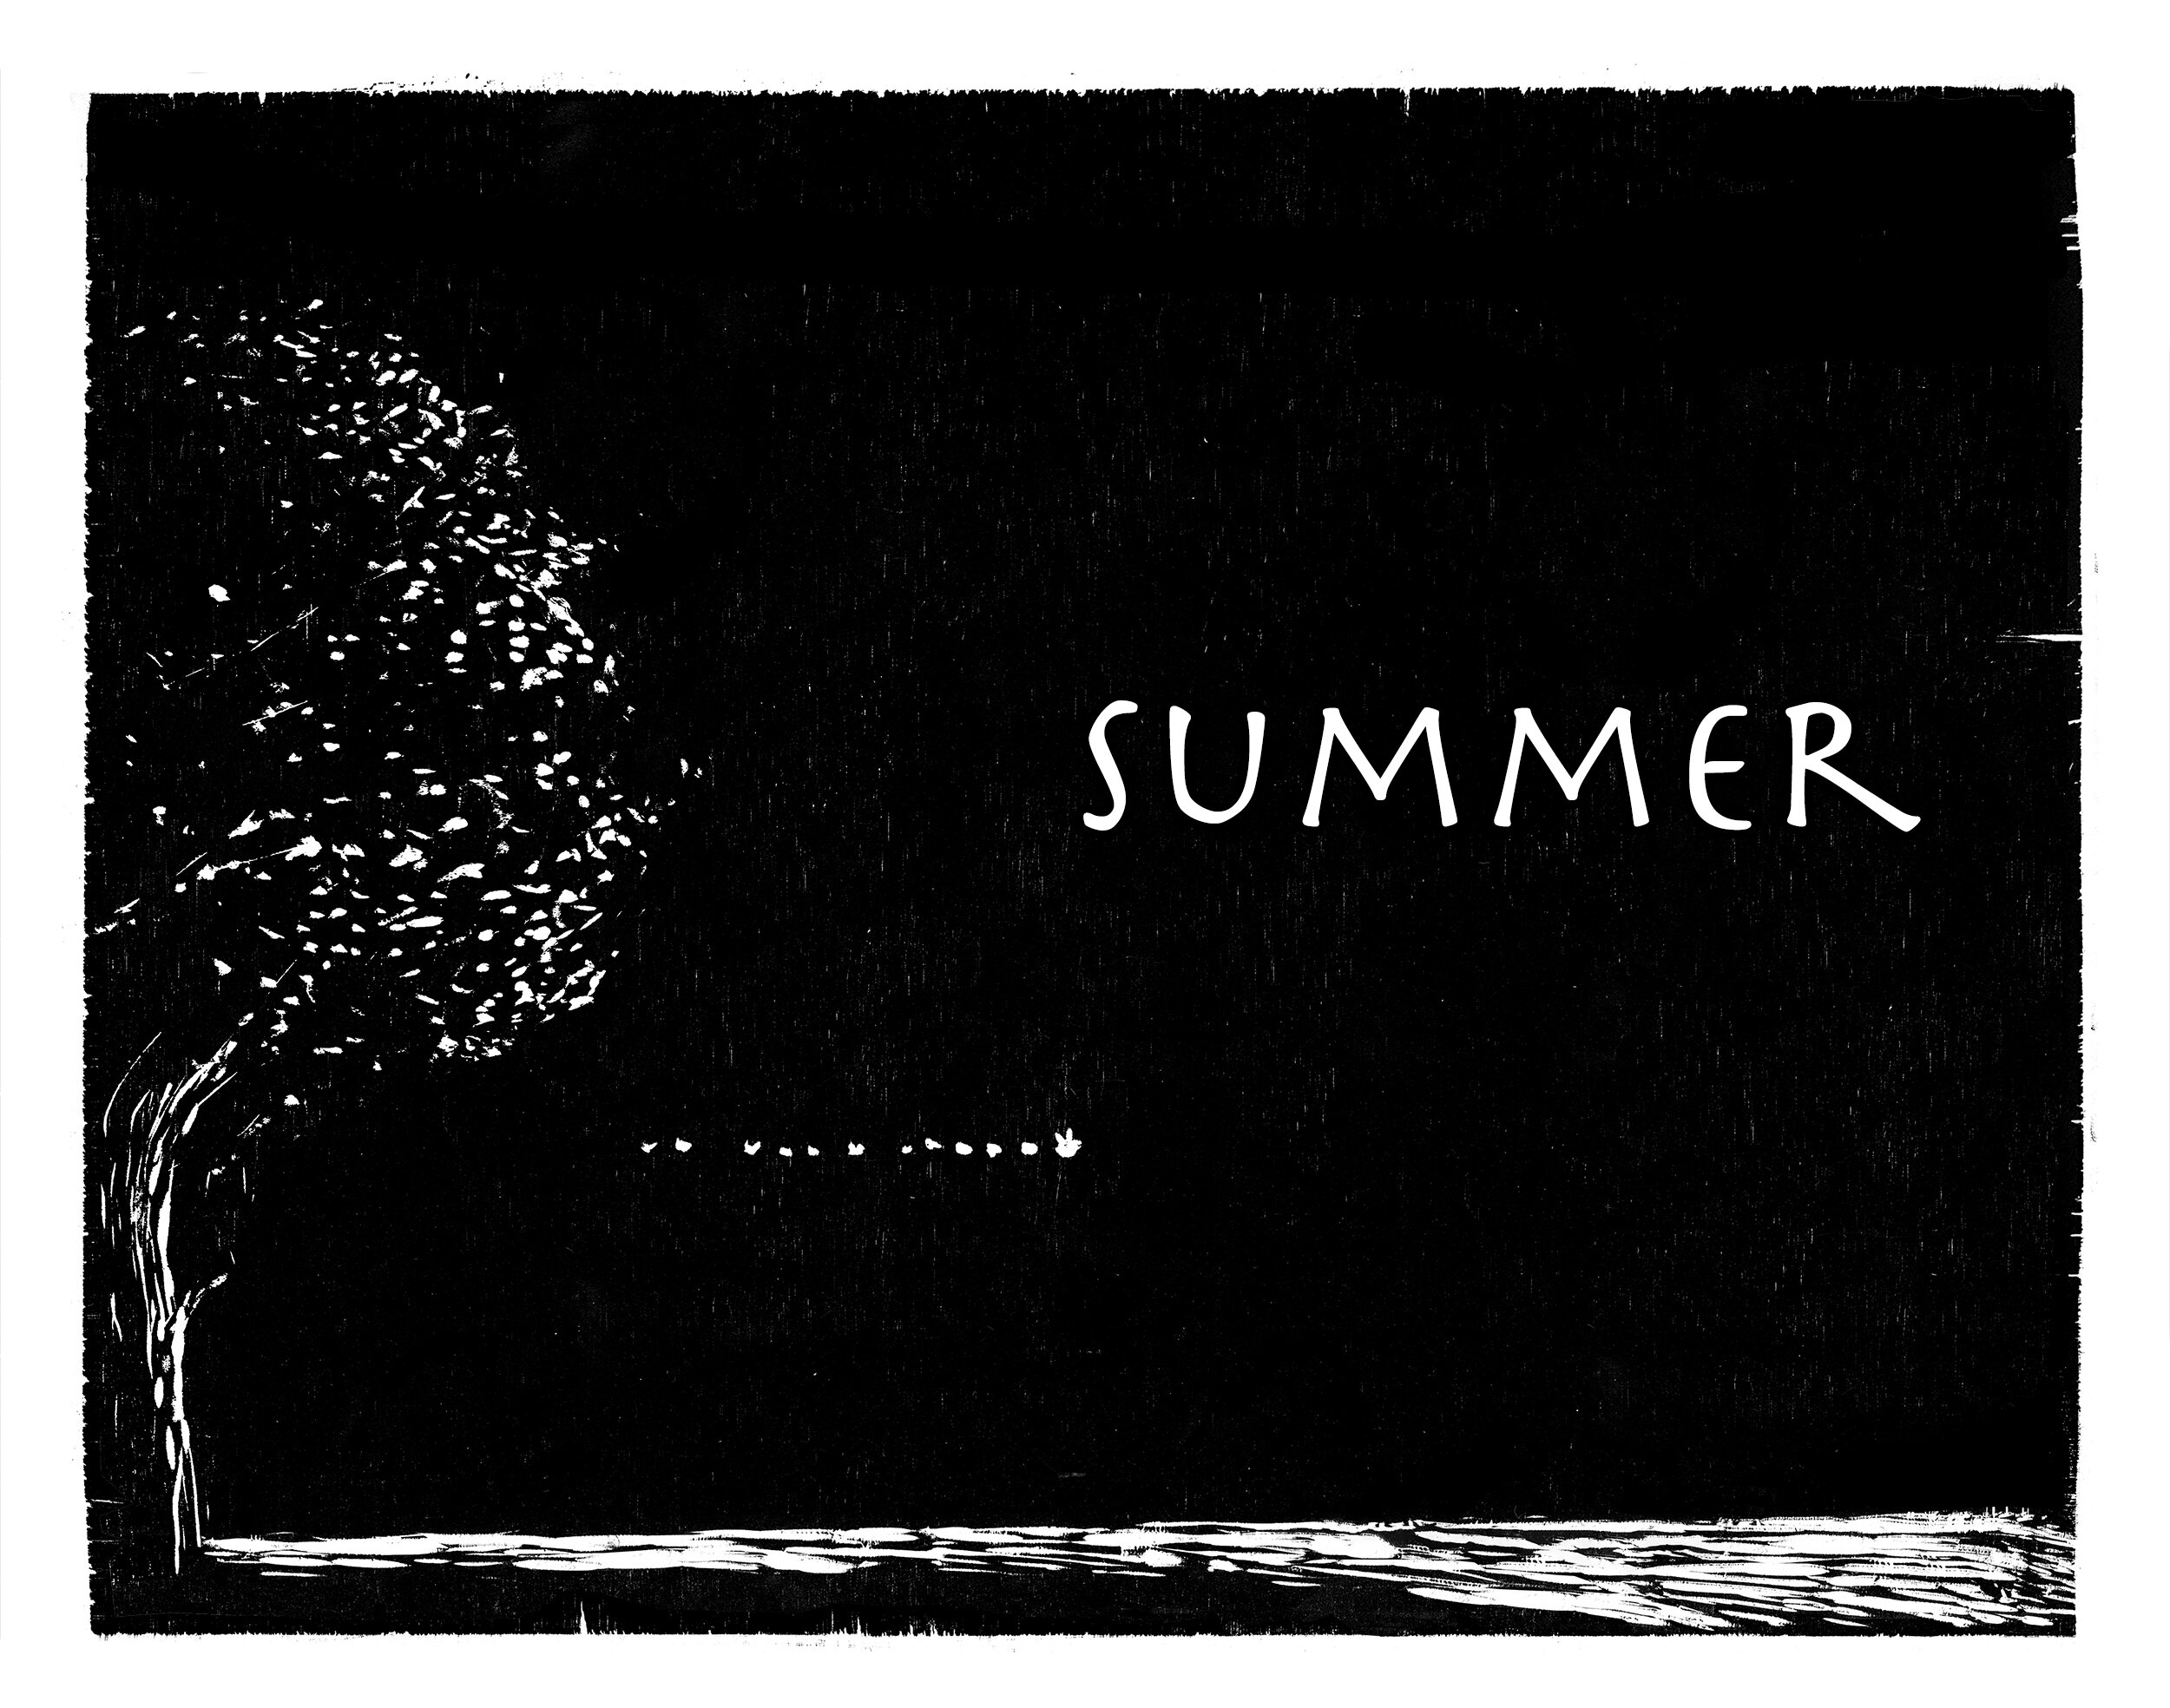 00_Title-Card-Sommer_ENGLISH_FINAL_01-150.jpg